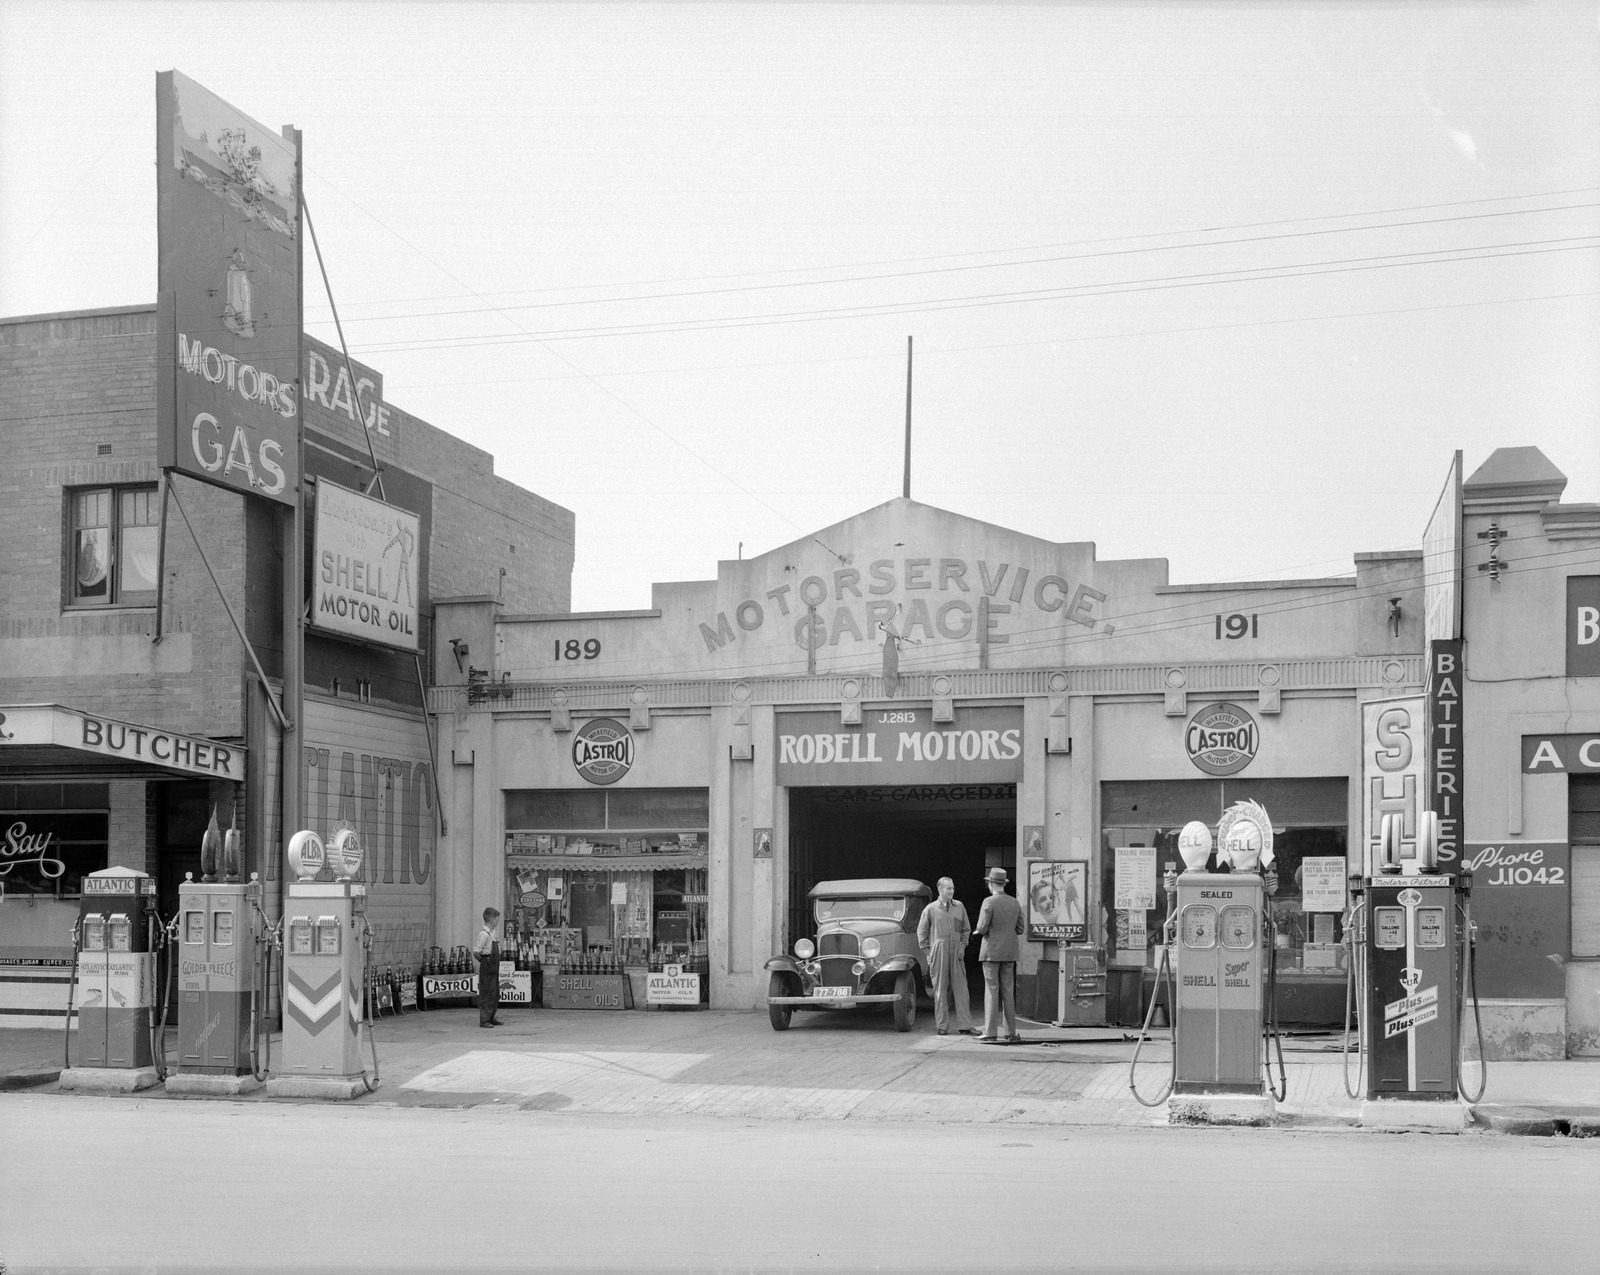 Robell Motors Motorservice Garage Collingwood with petrol pumps in foreground